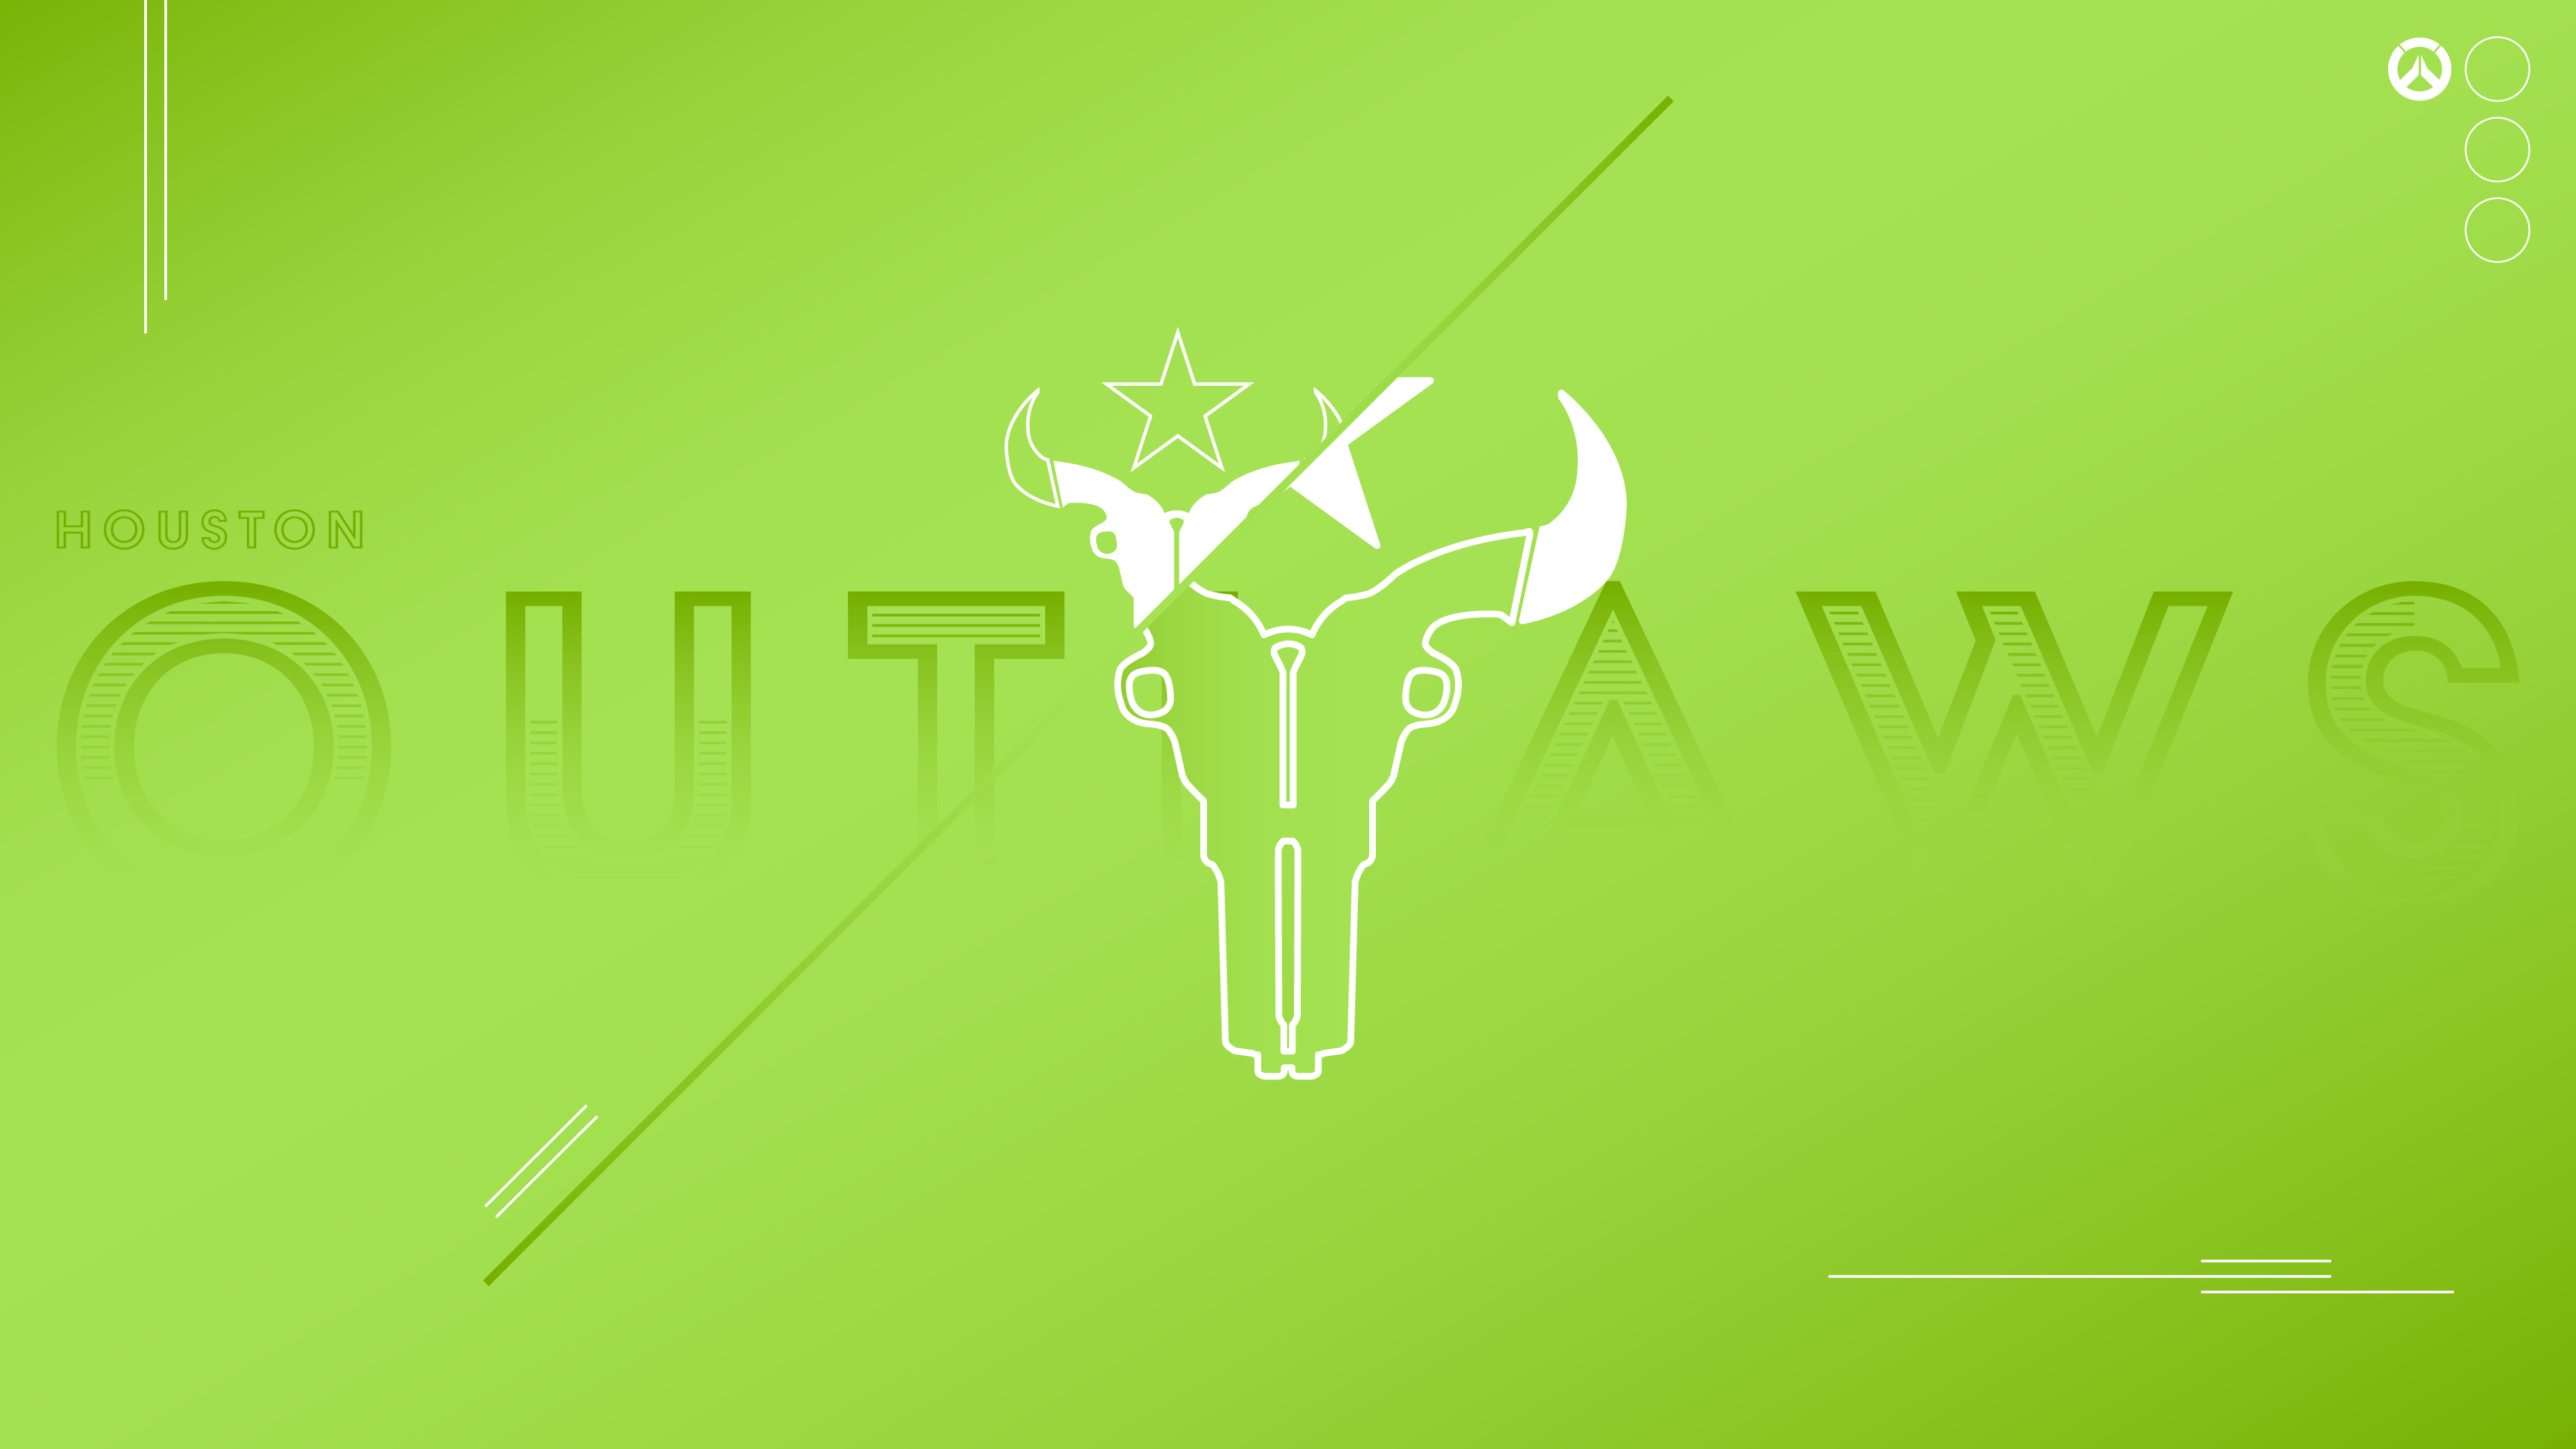 100+] Outlaw Wallpapers | Wallpapers.com